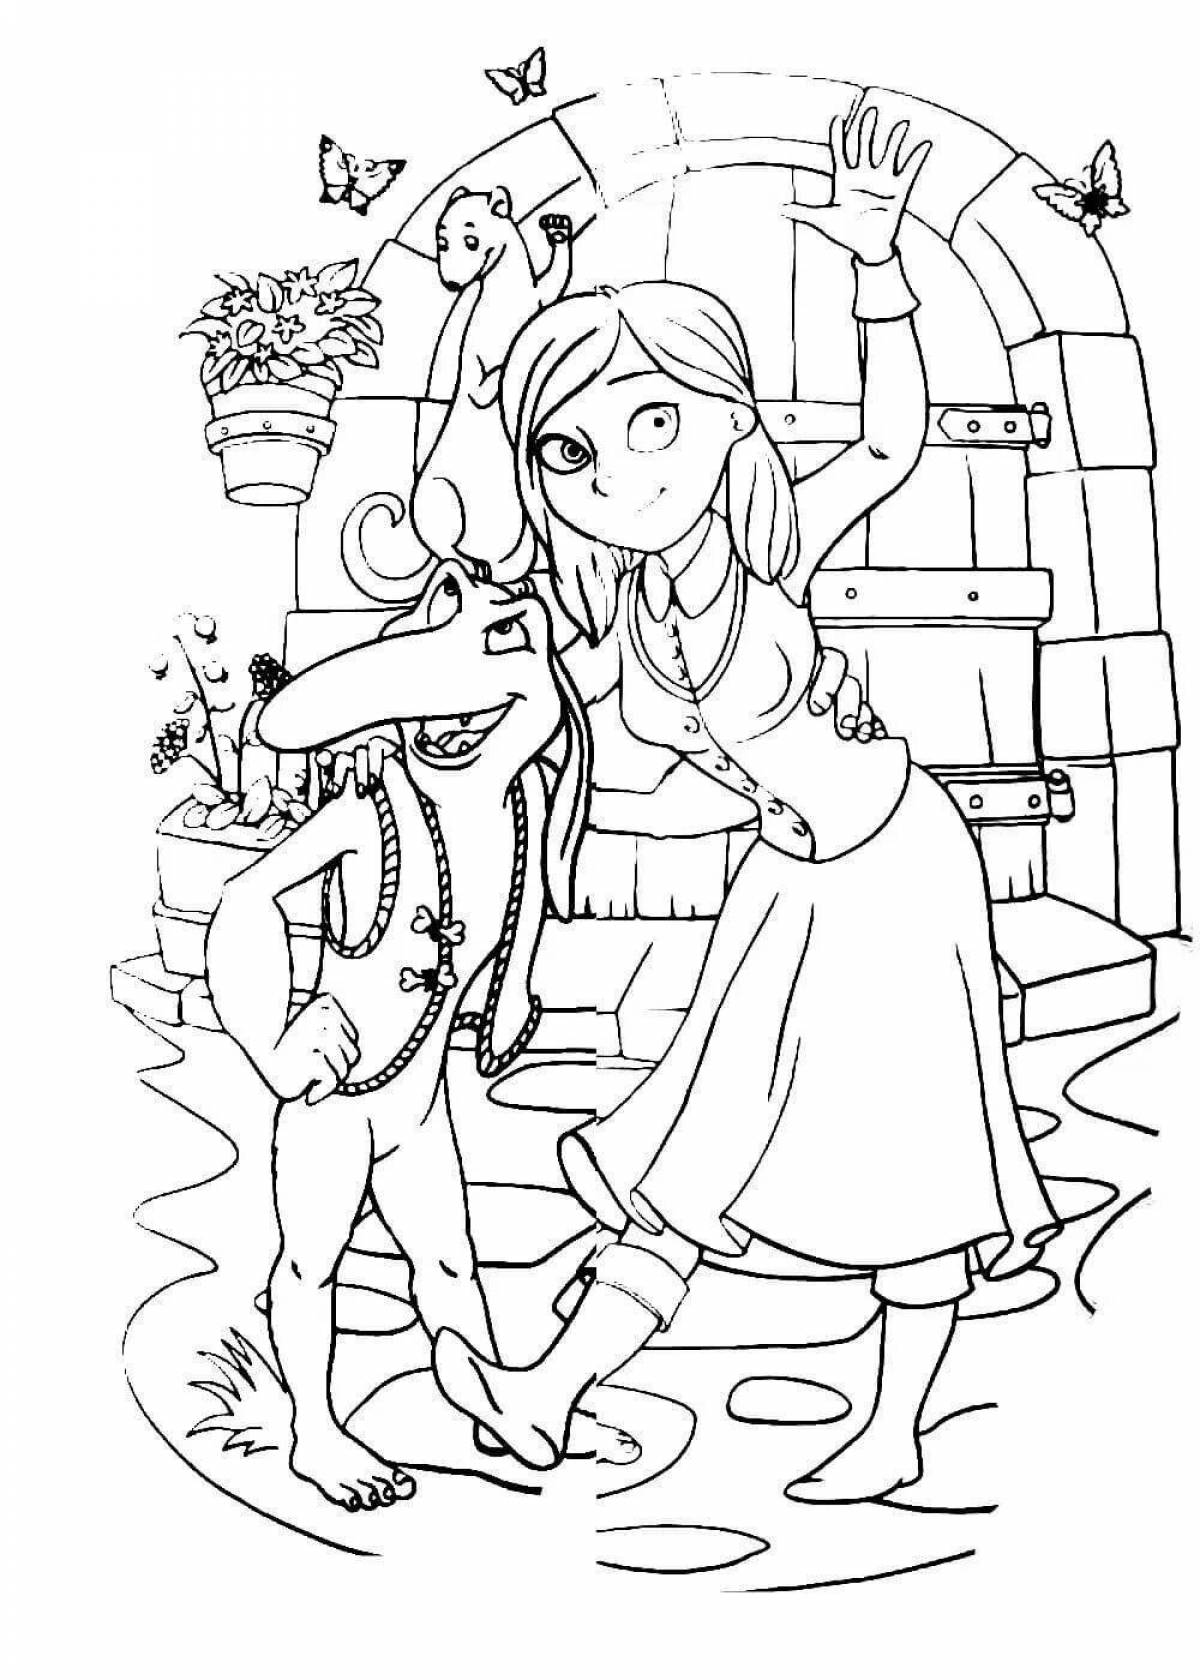 Rich keepers of miracles coloring page